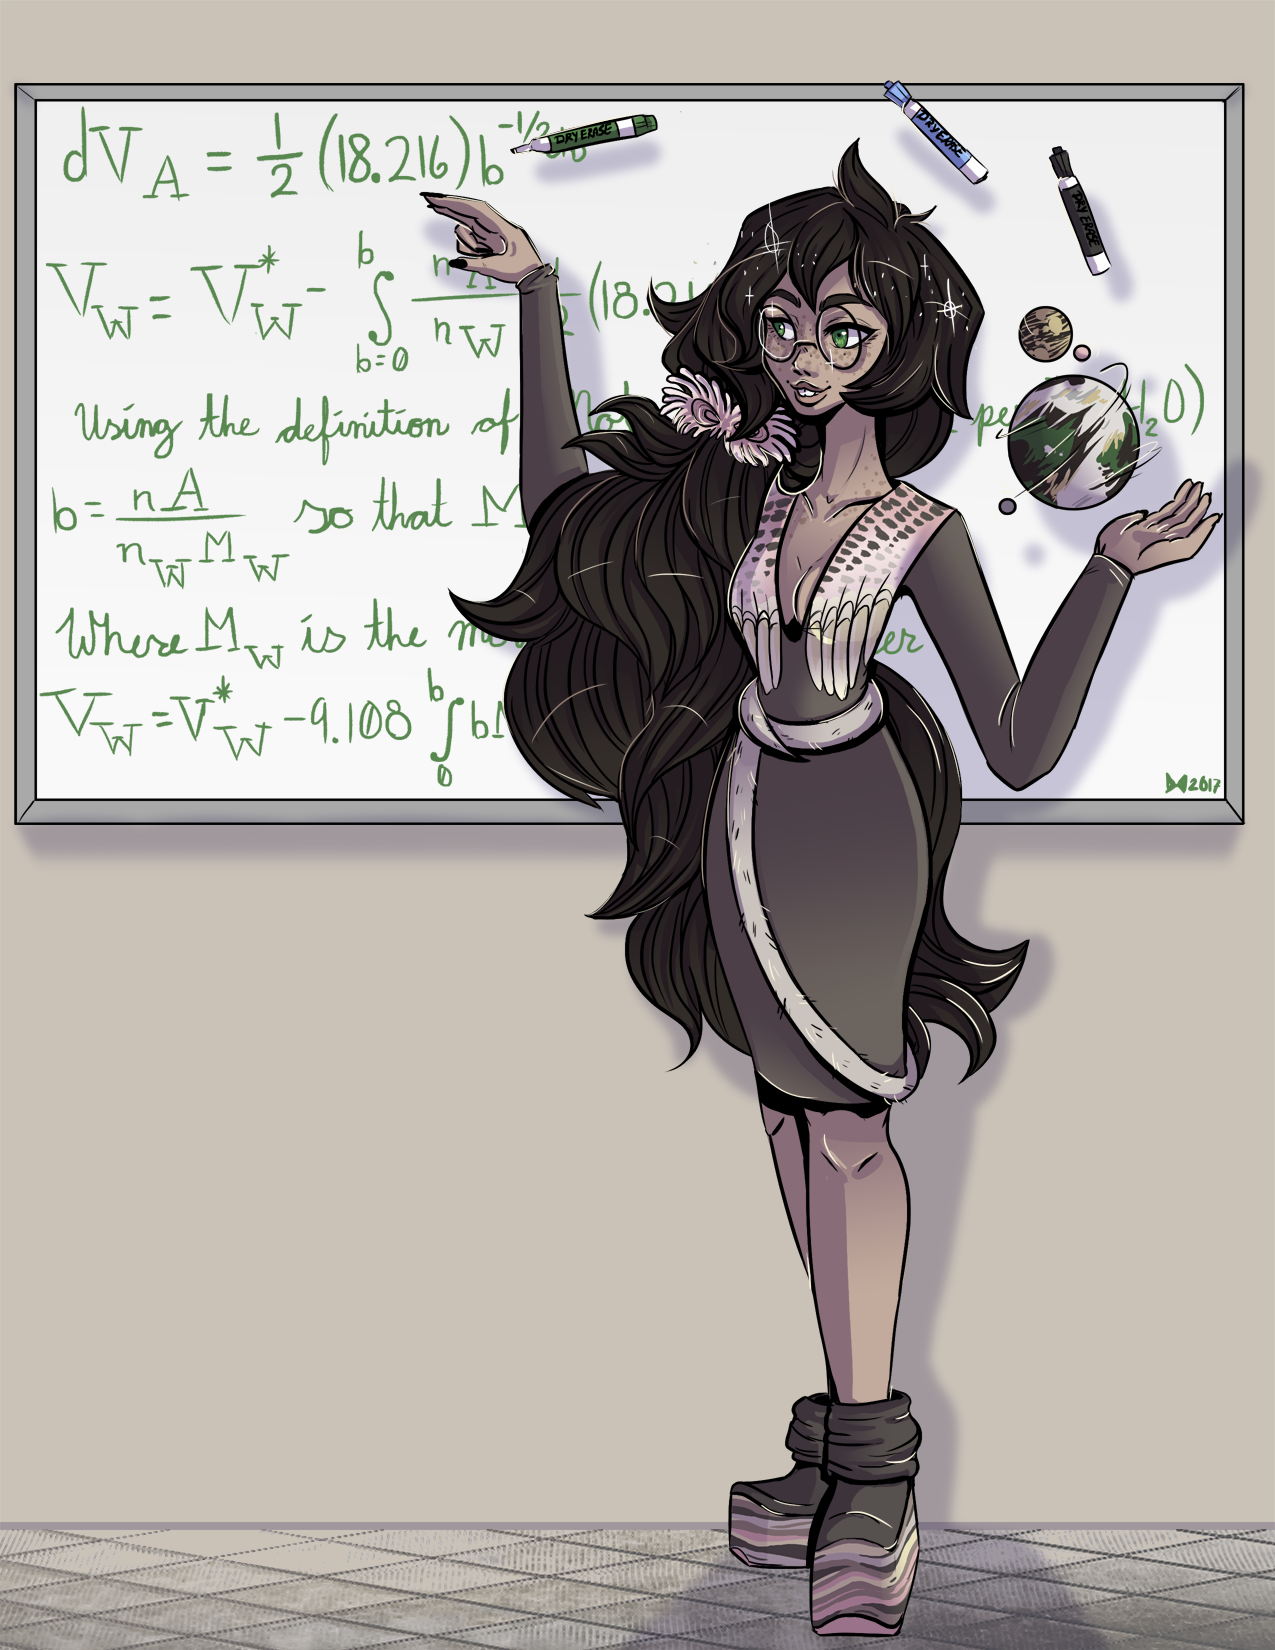 doomedmaid:
“Illustration commission for @sudrien of his amazing idea for a dress for Jade Harley based off of Avogadro’s number! Brilliant Idea, and I had so much fun going through so many designs before we both were happy with this final one~
”